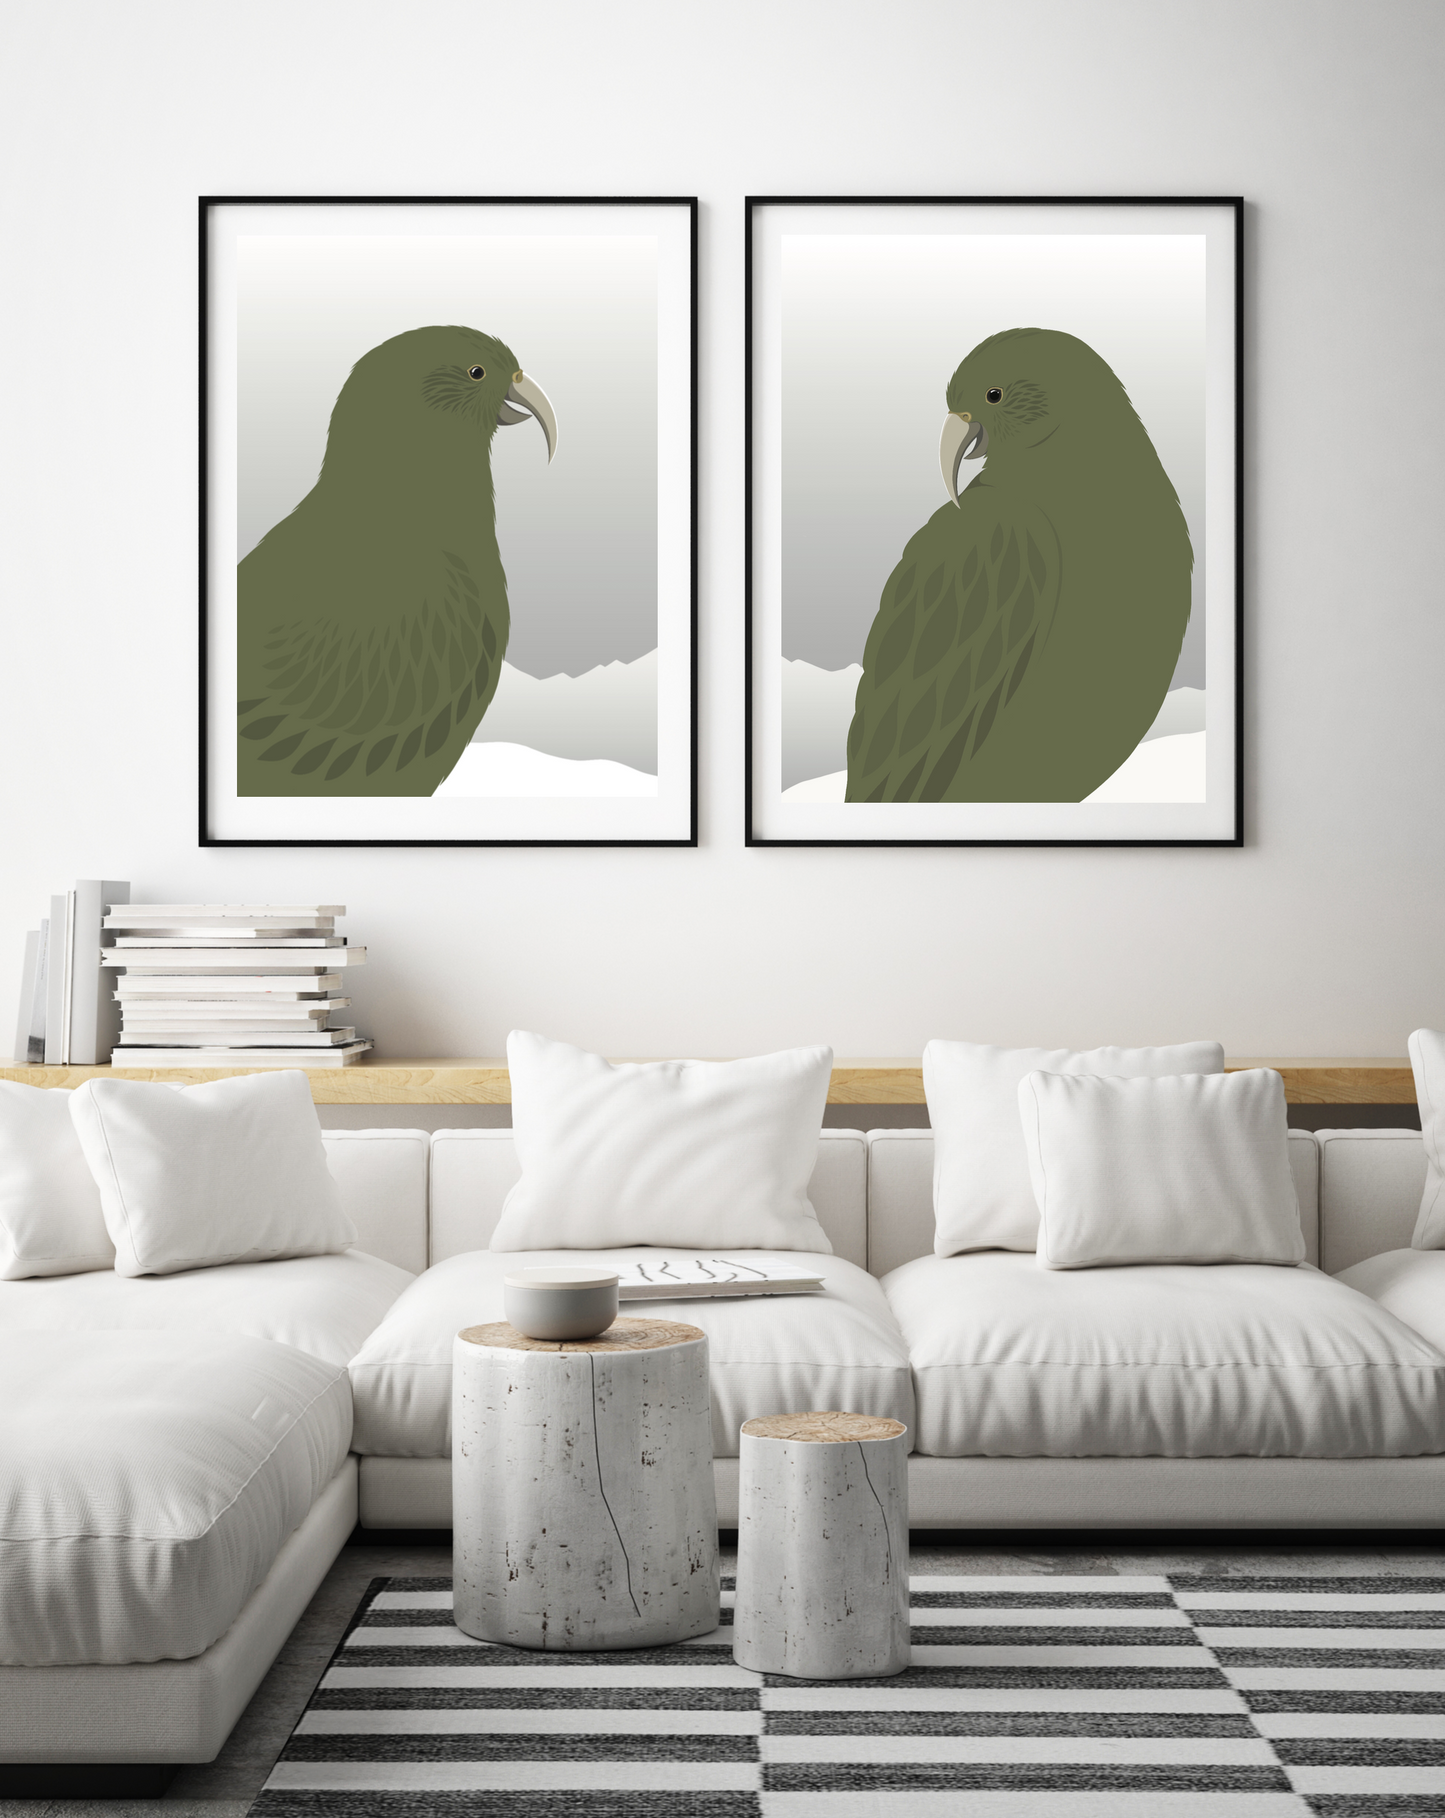 Framed Prints of the New Zealand Kea bird, by artist Hansby Design 